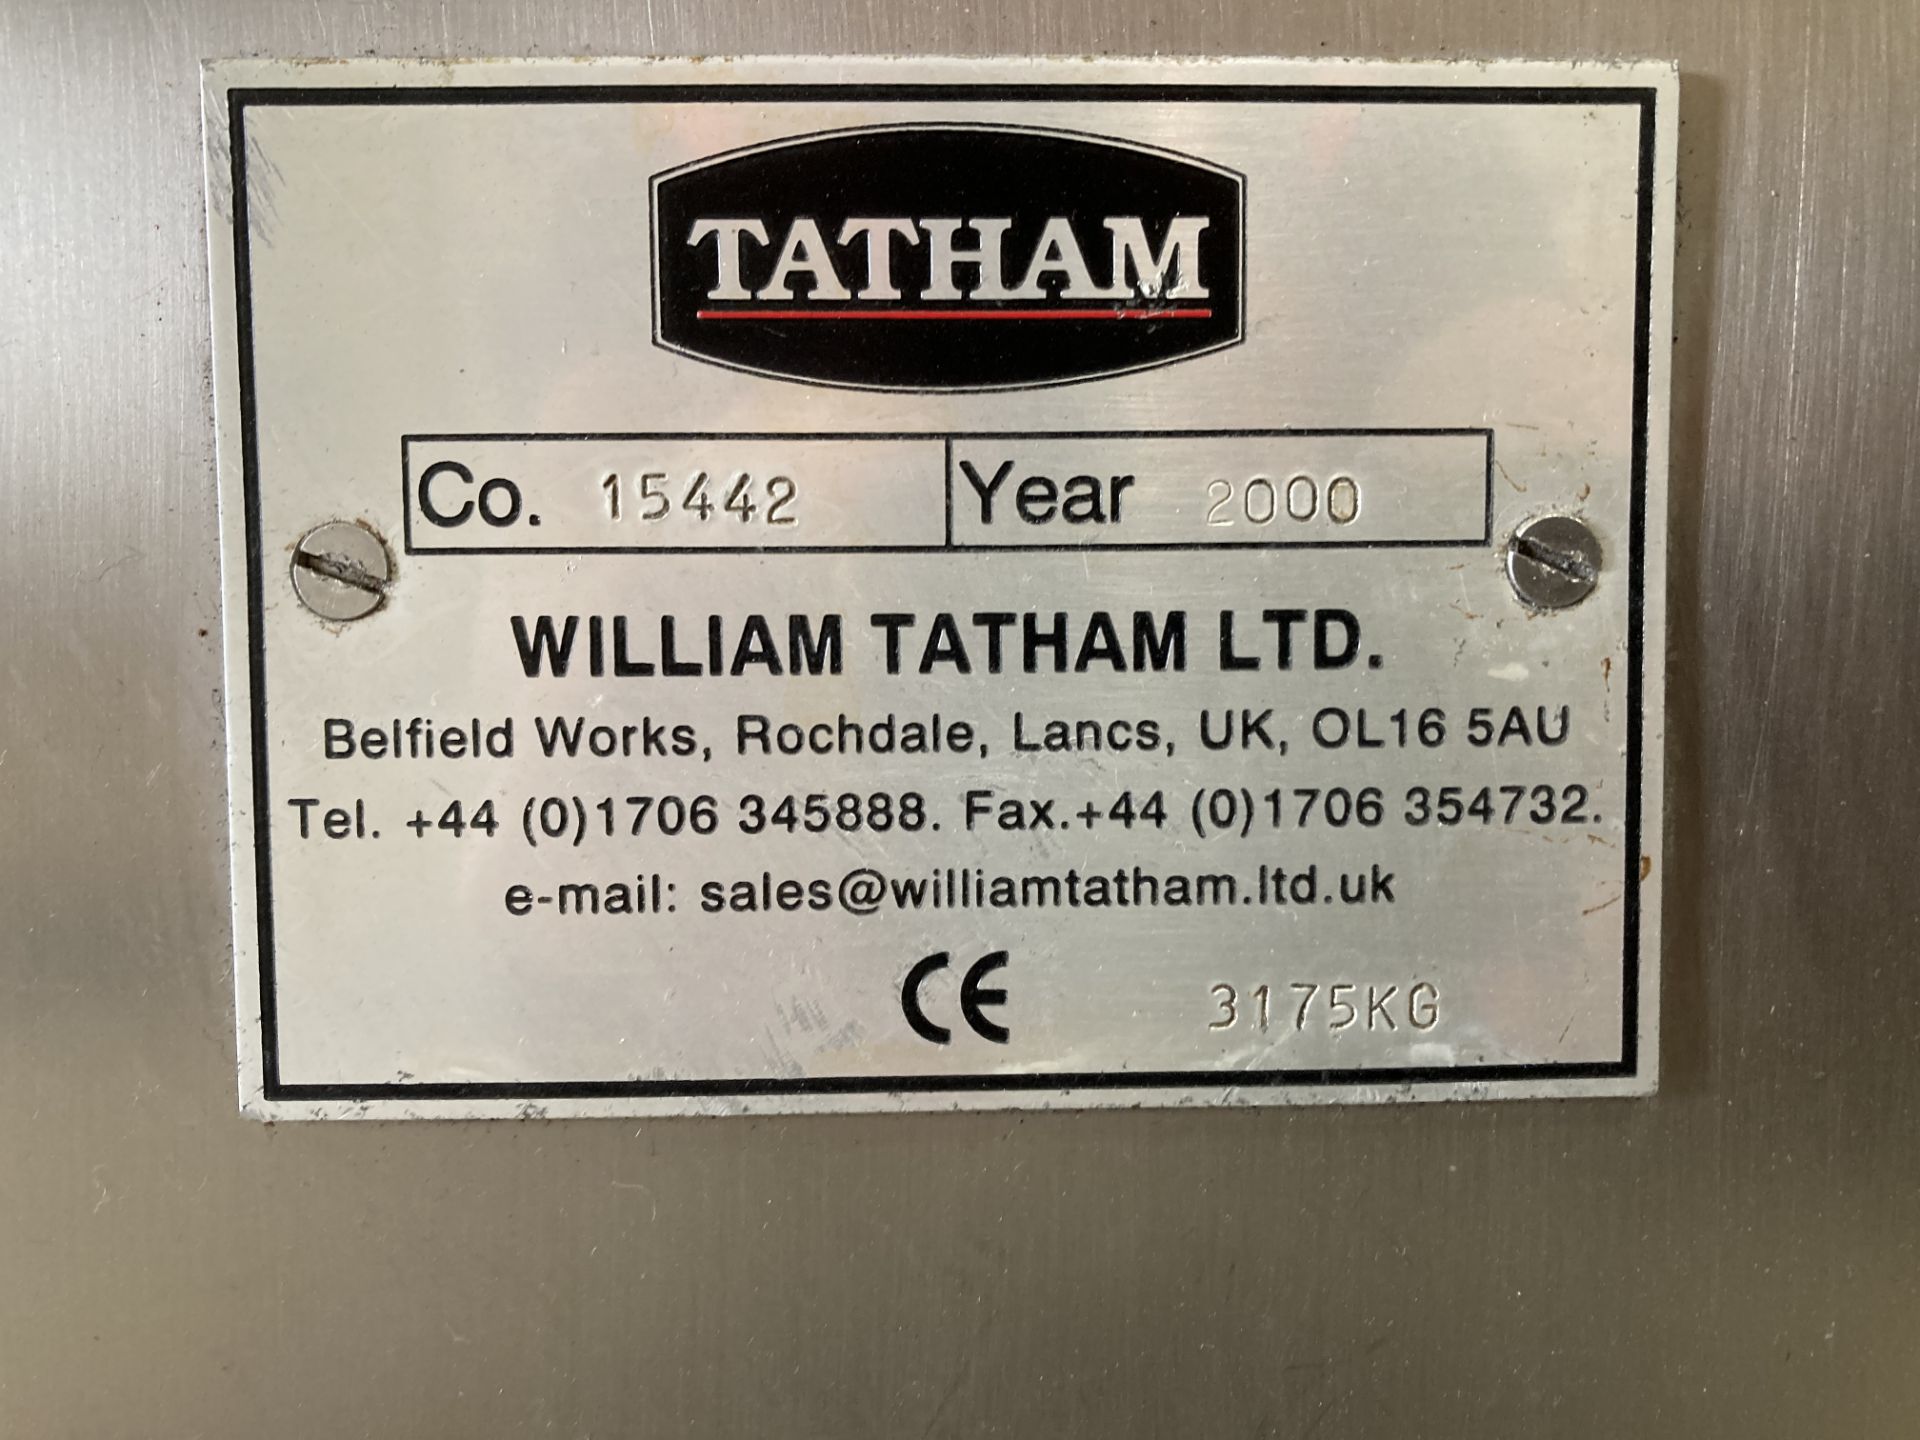 Tatham approx. 1,000 litre 304 STAINLESS STEEL TWIN SHAFT PADDLE MIXER, serial no. 15442, year of - Image 5 of 8